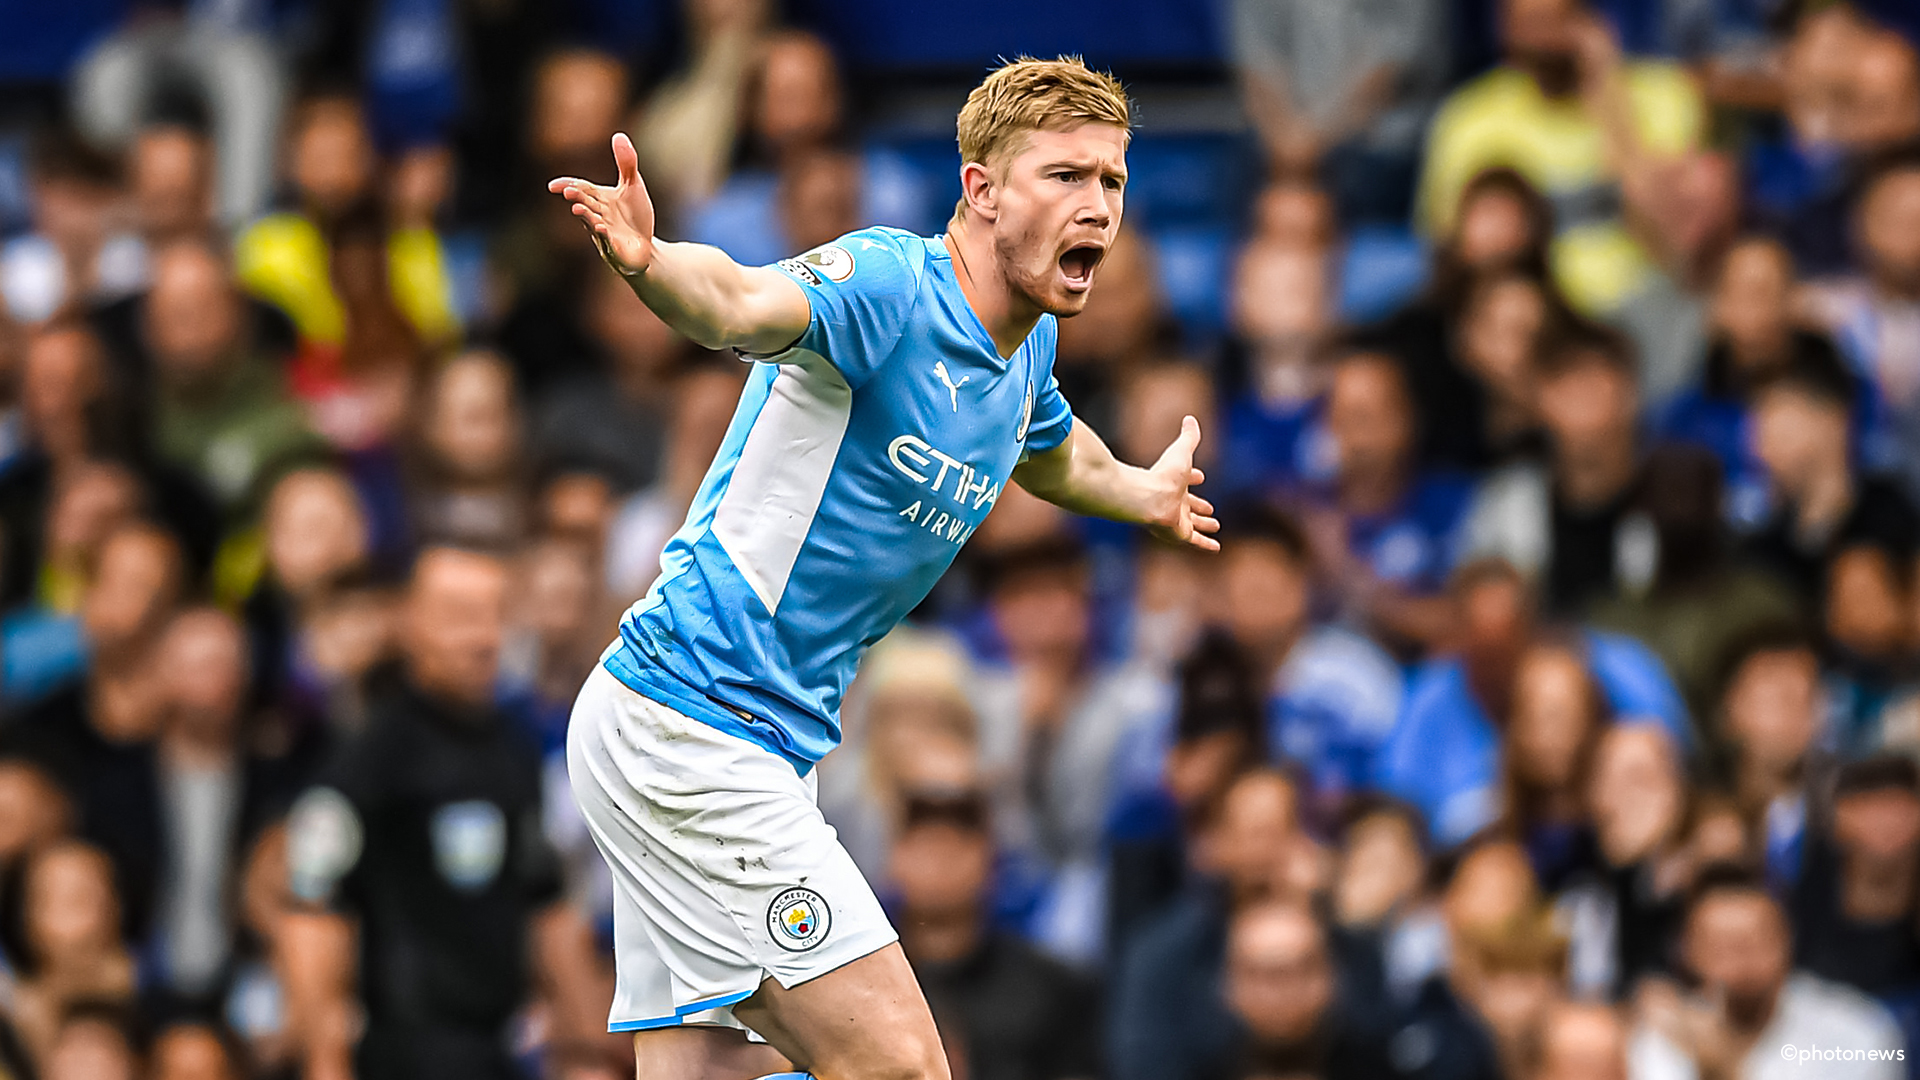 What's going on with Kevin De Bruyne? “We are used to his high level”